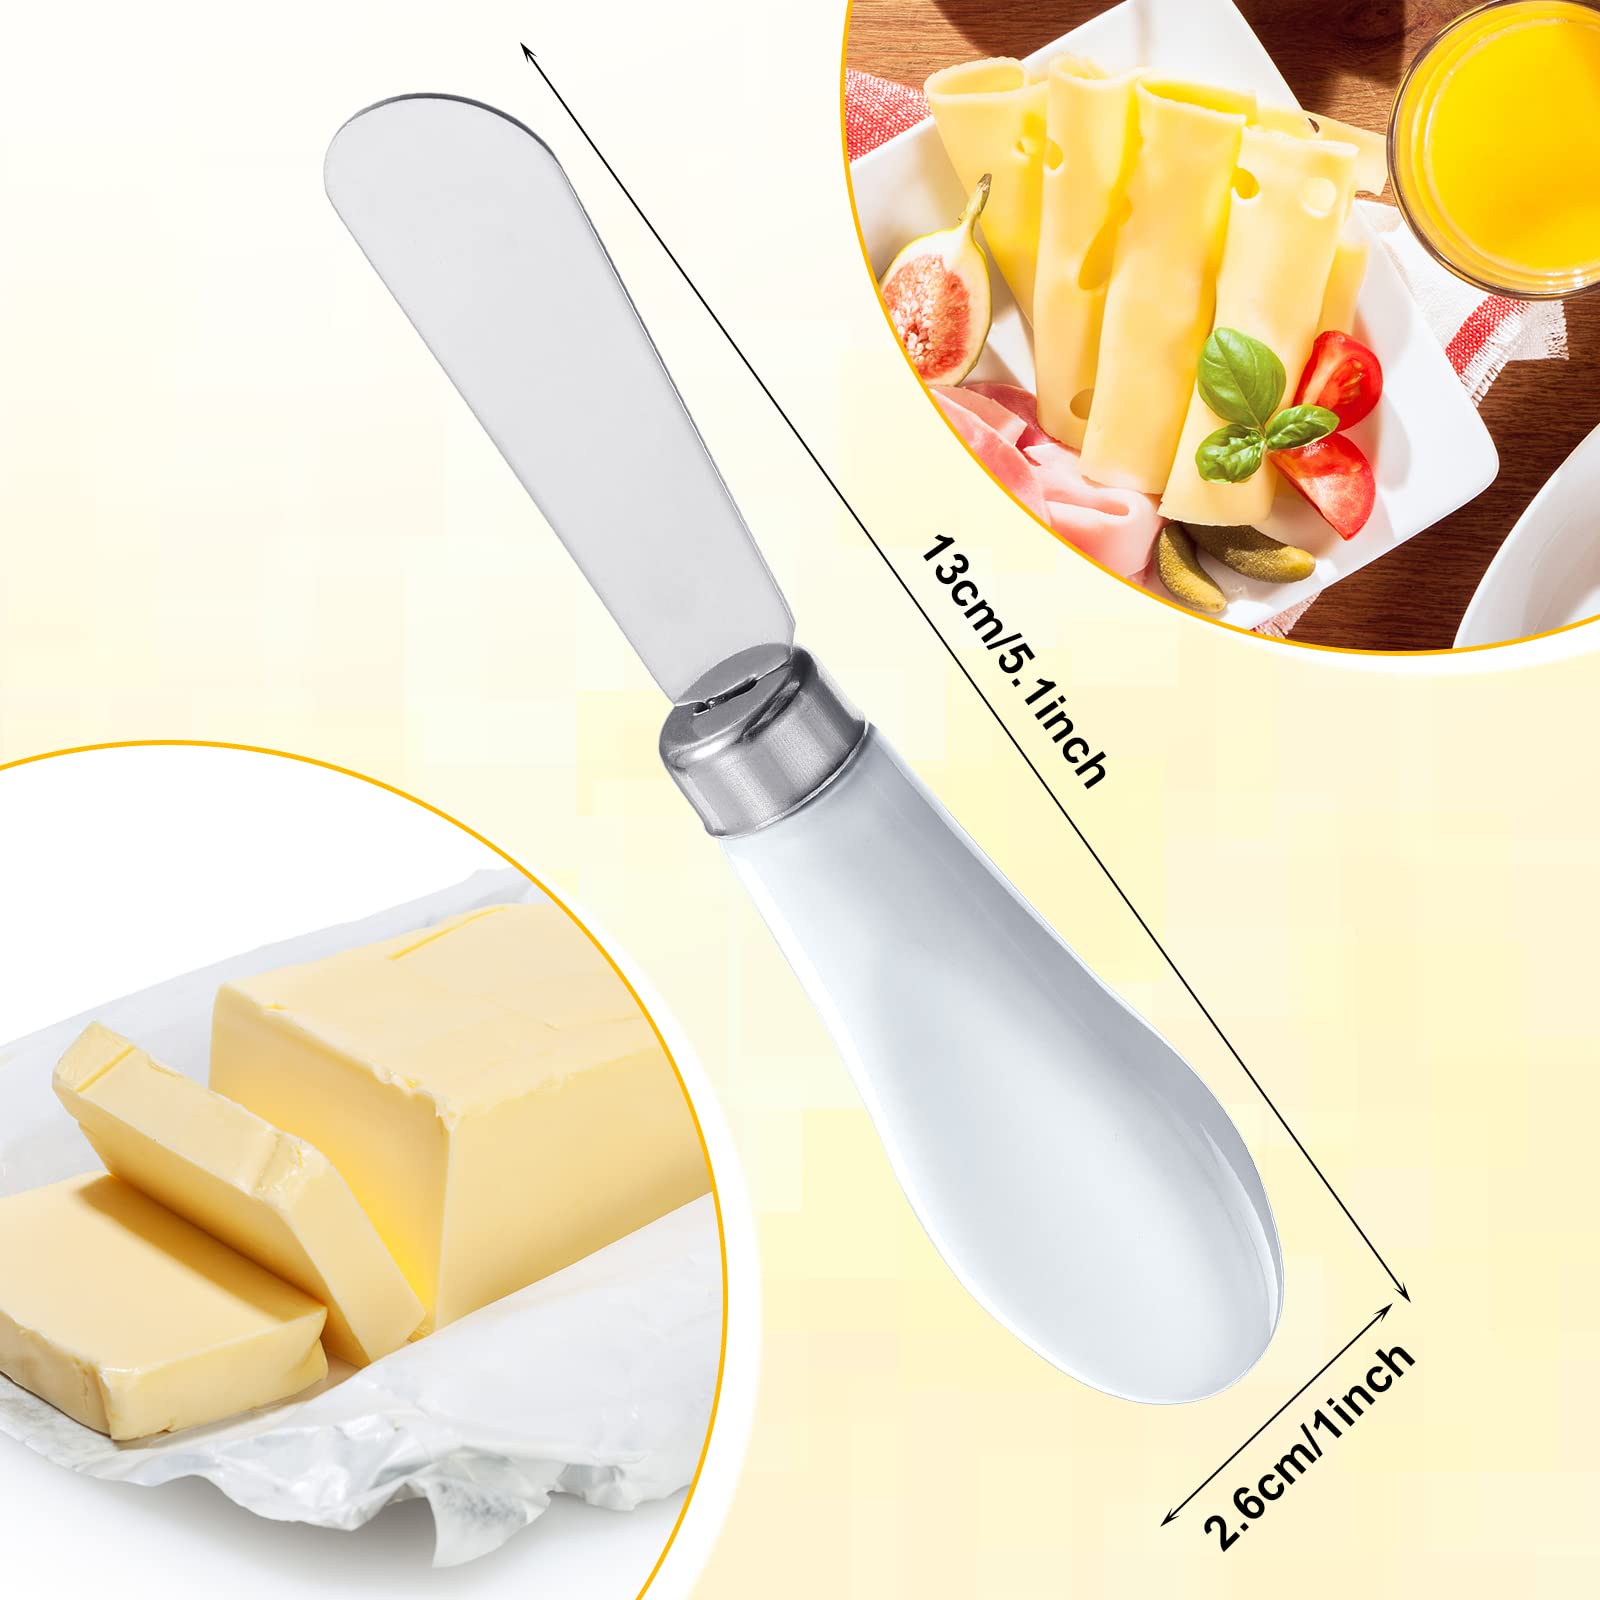 Mixweer 4 Pcs Butter Knife Stainless Steel Butter Spreader Knife with White Porcelain Handle Wide Blade Cheese Knife Spreader for Kitchen Use, 5.1 Inch